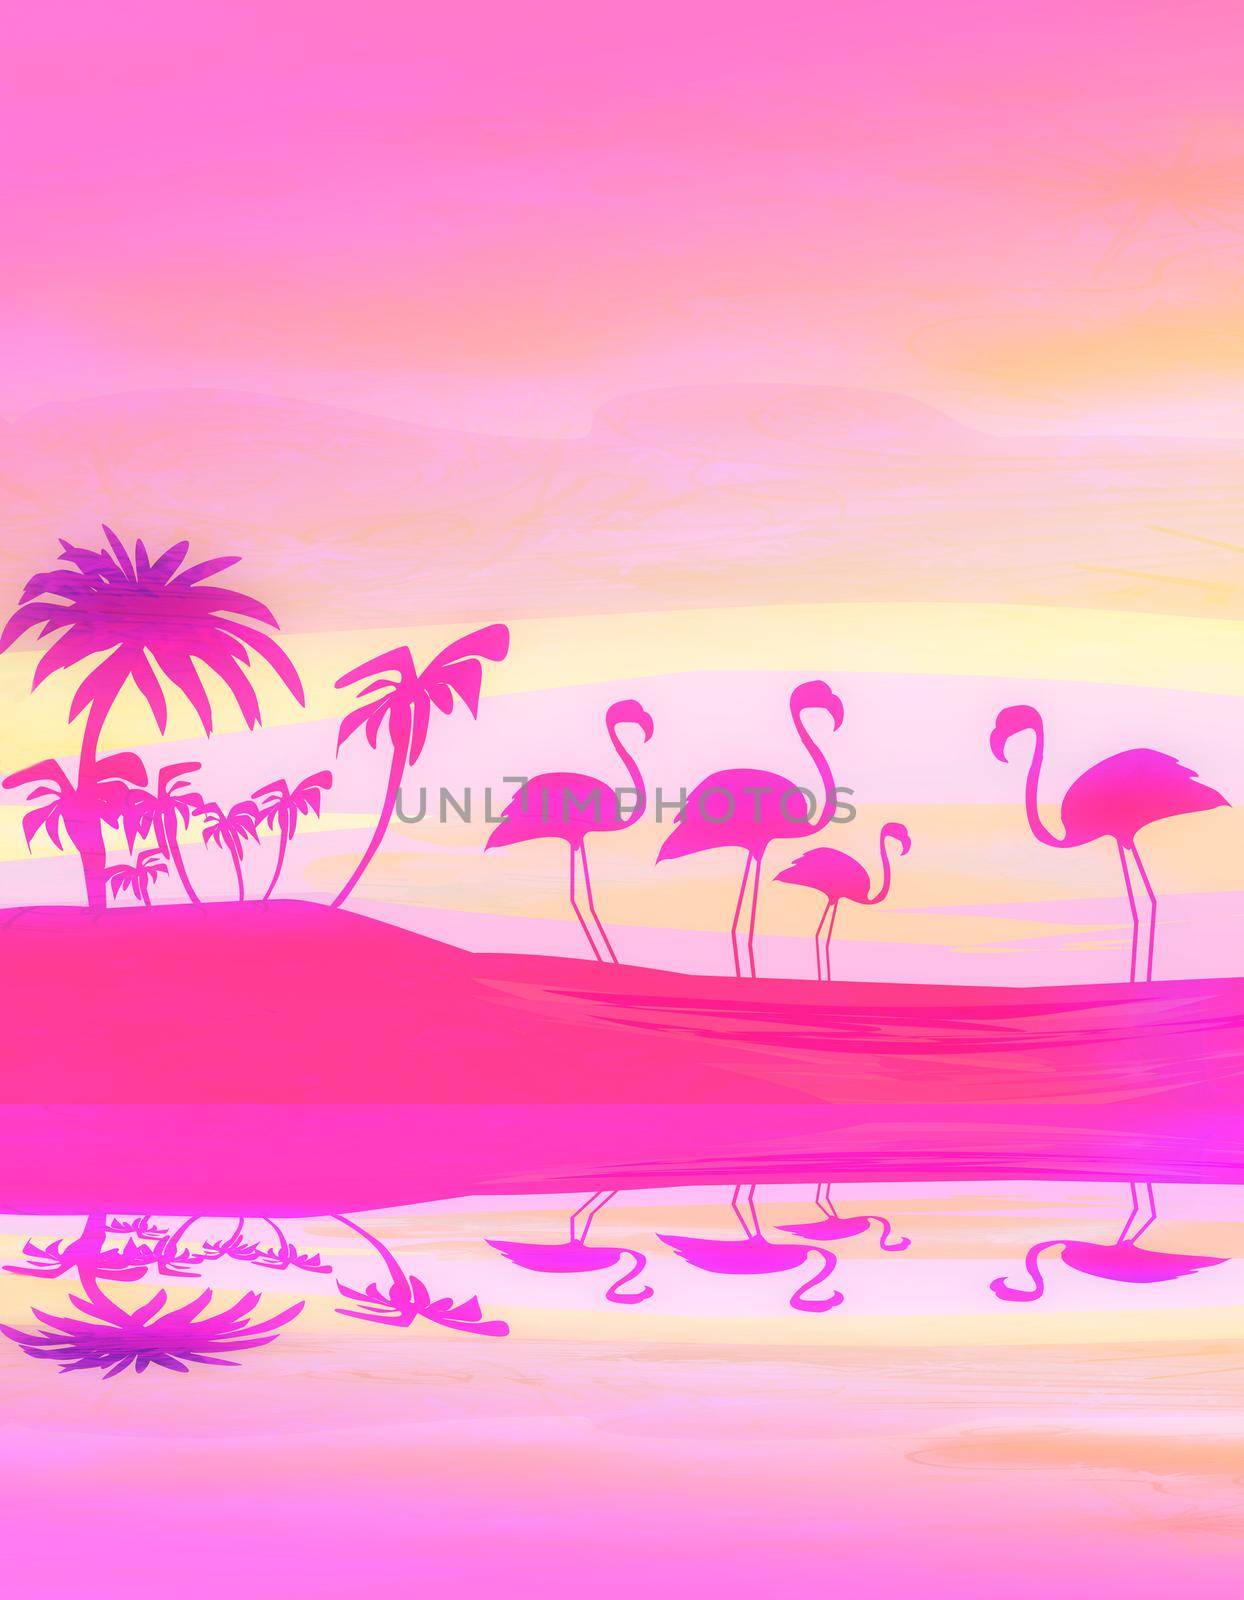 flamingos in wild nature landscape during sunset, silhouette illustration